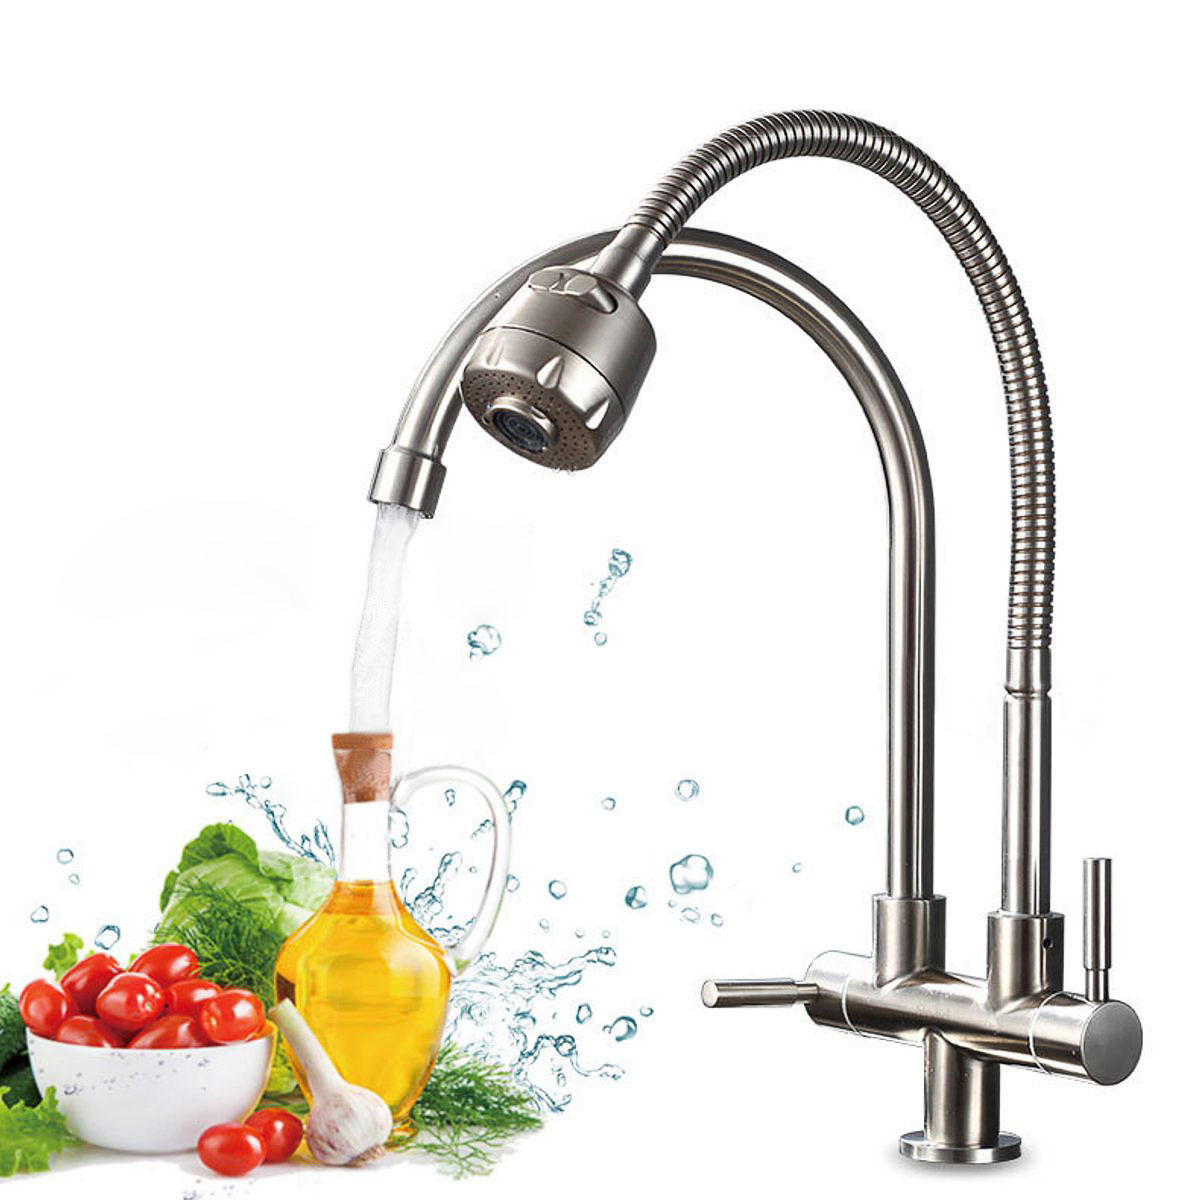 

Stainless Steel Double Hole Faucet Wash Basin Swivel Water Taps Mixer Tap